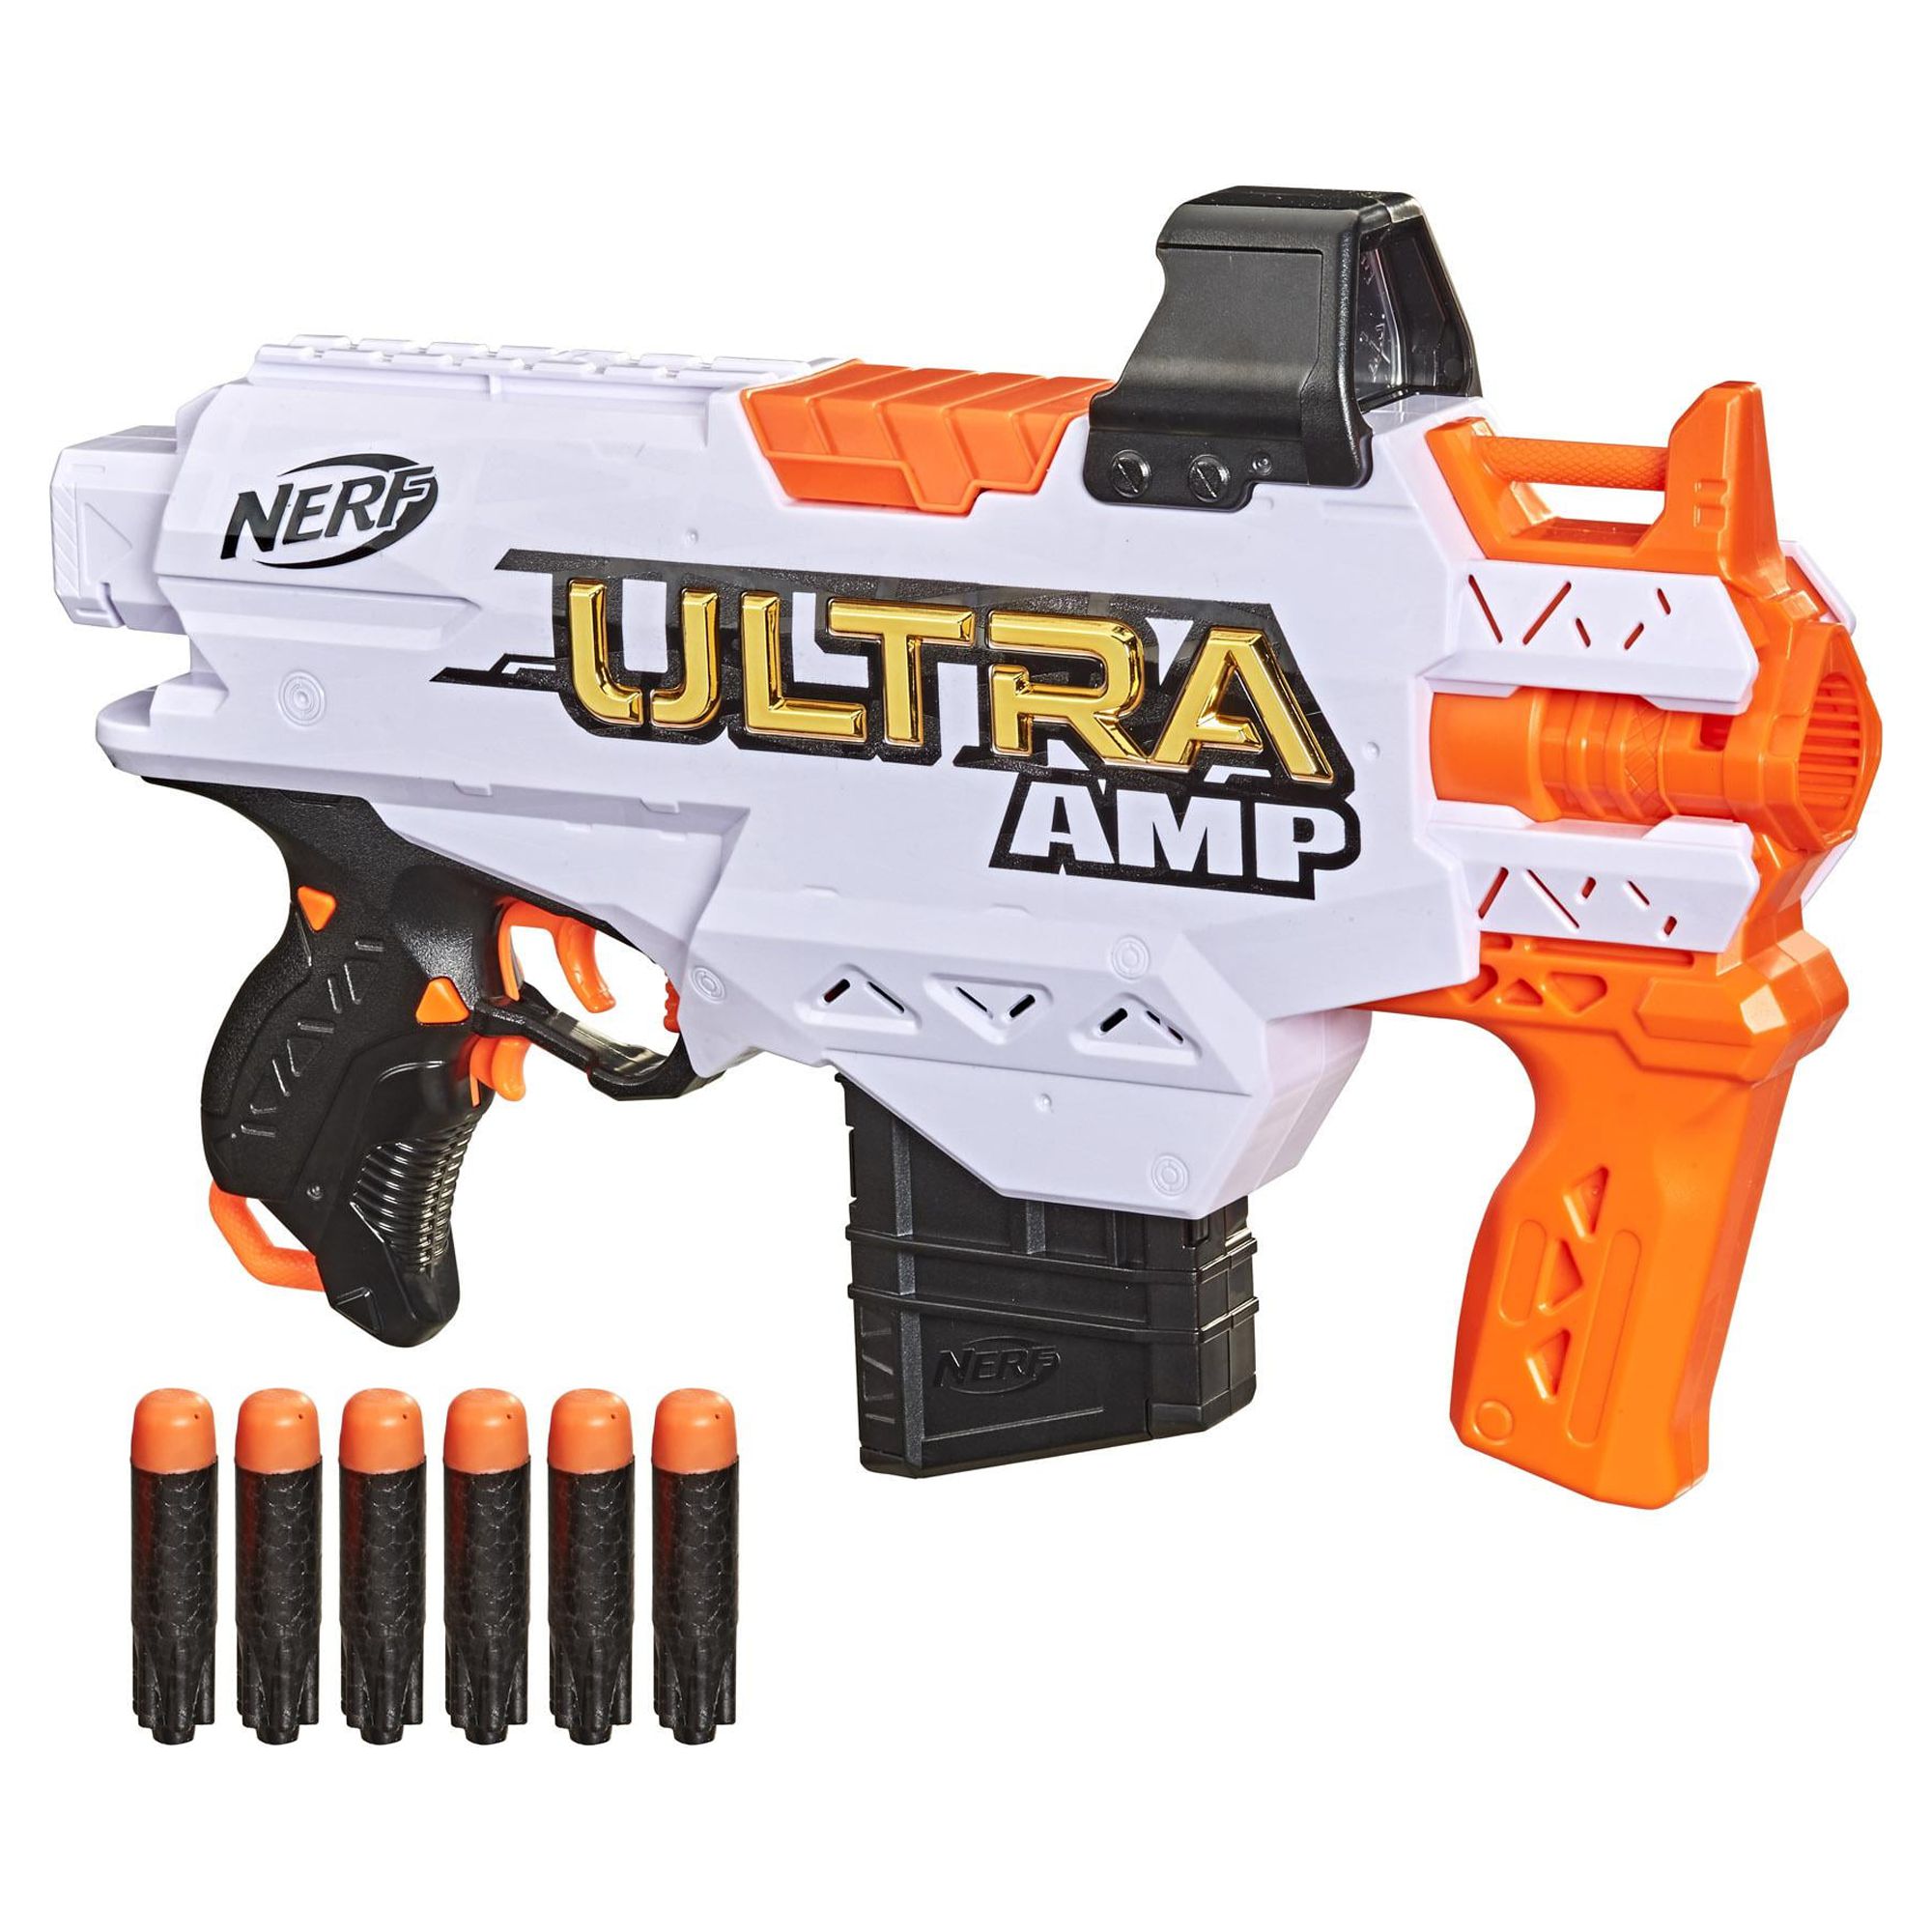 Nerf Ultra Amp Motorized Blaster, 6-Dart Clip, 6 Darts, Compatible Only with Nerf Ultra Darts - image 1 of 10